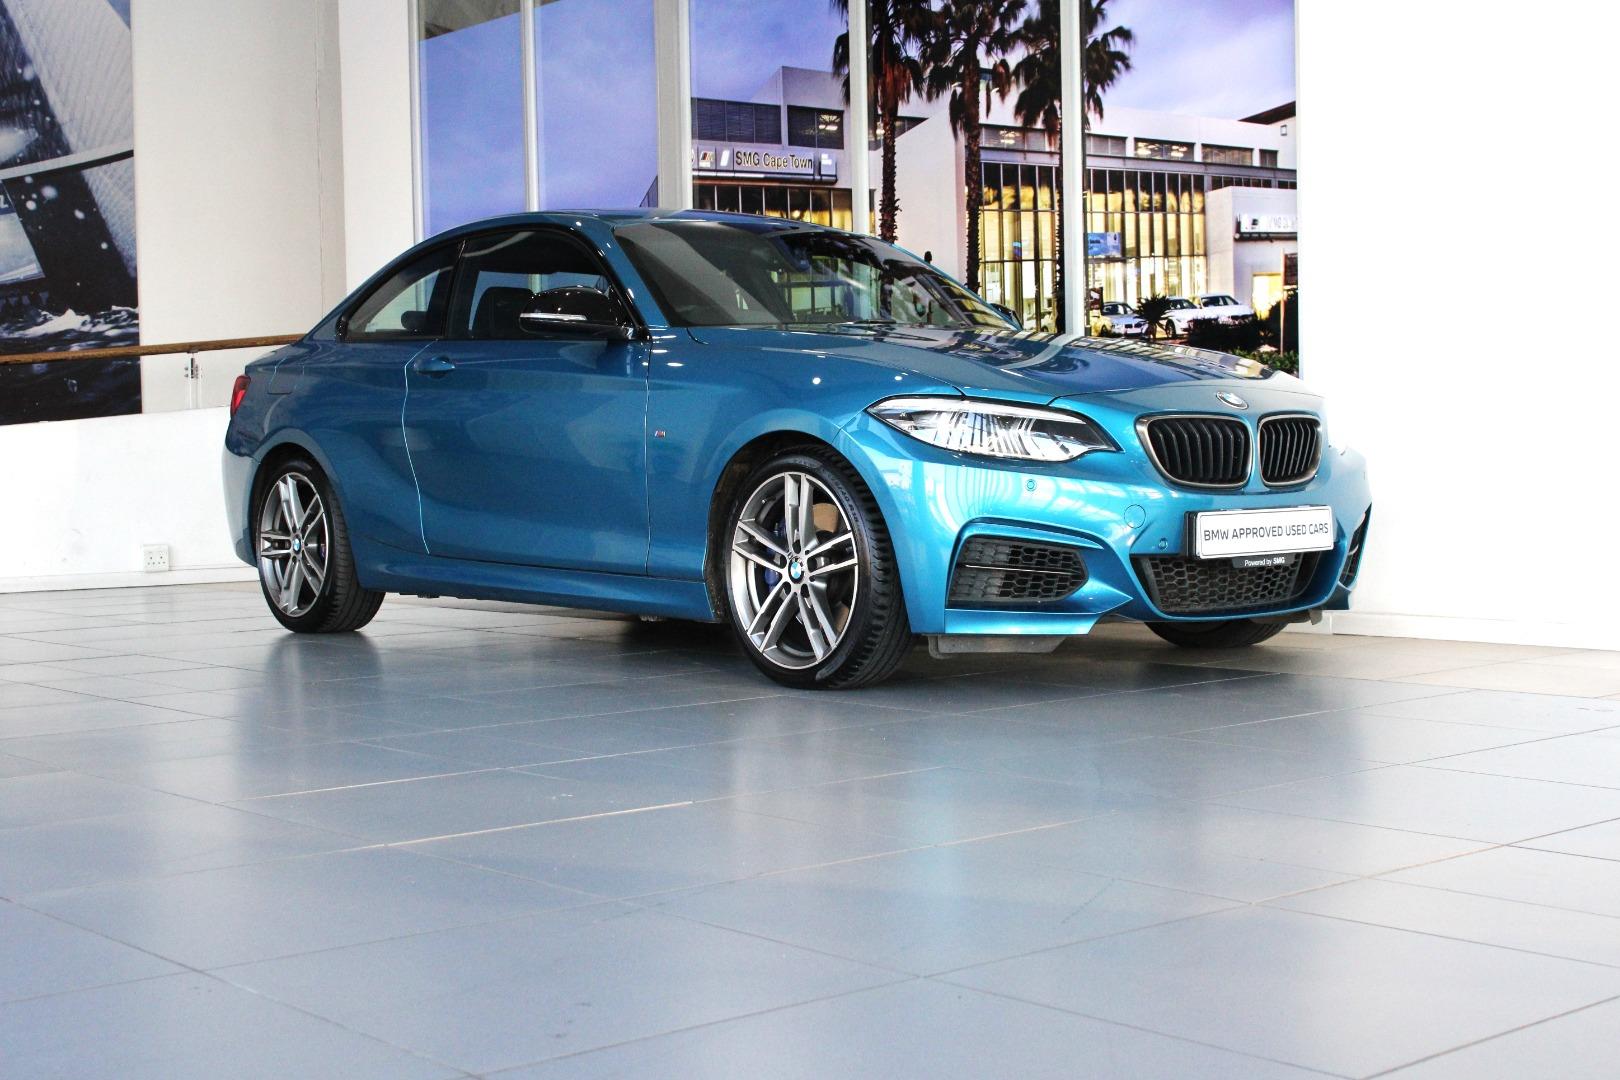 2019 BMW M240i A/T (F22)  for sale, city - SMG12|USED|115416